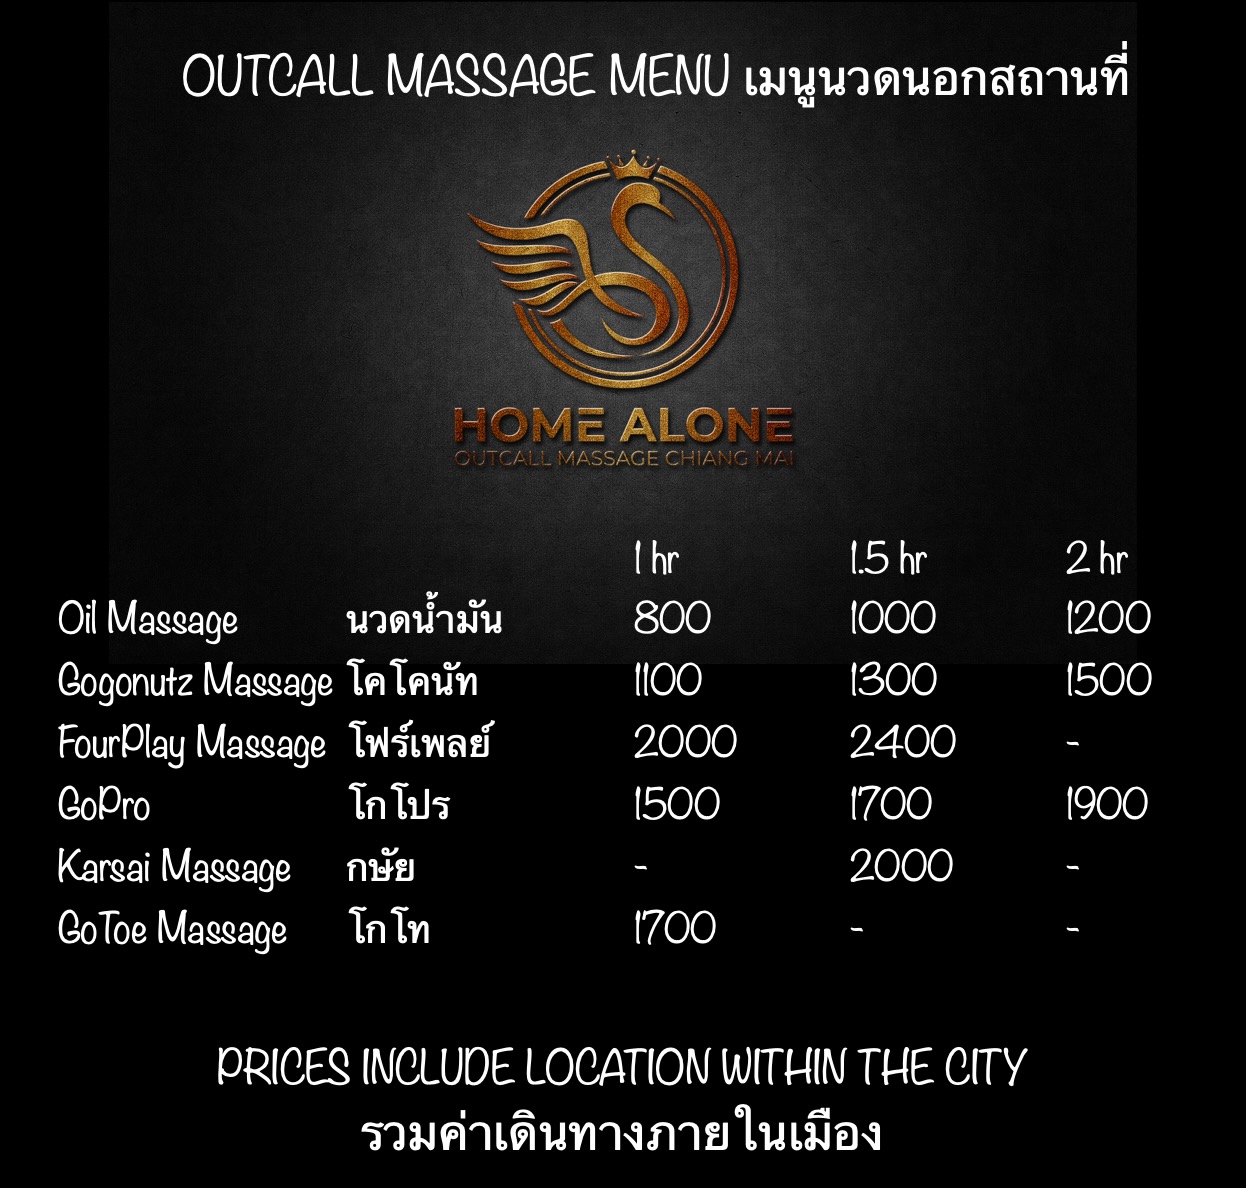 Home Alone Outcall Massage Services Chiang Mai